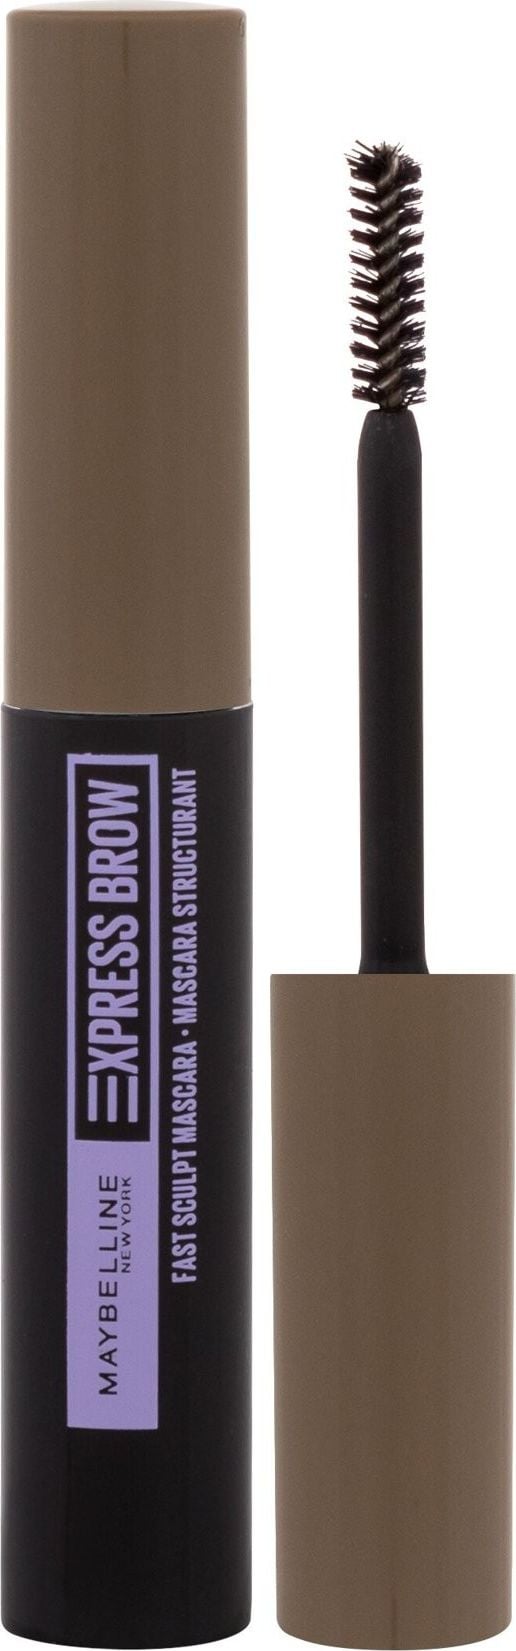 Maybelline Maybelline Express Brow Fast Sculpt Mascara Tusz do brwi 16ml 02 Soft Brown